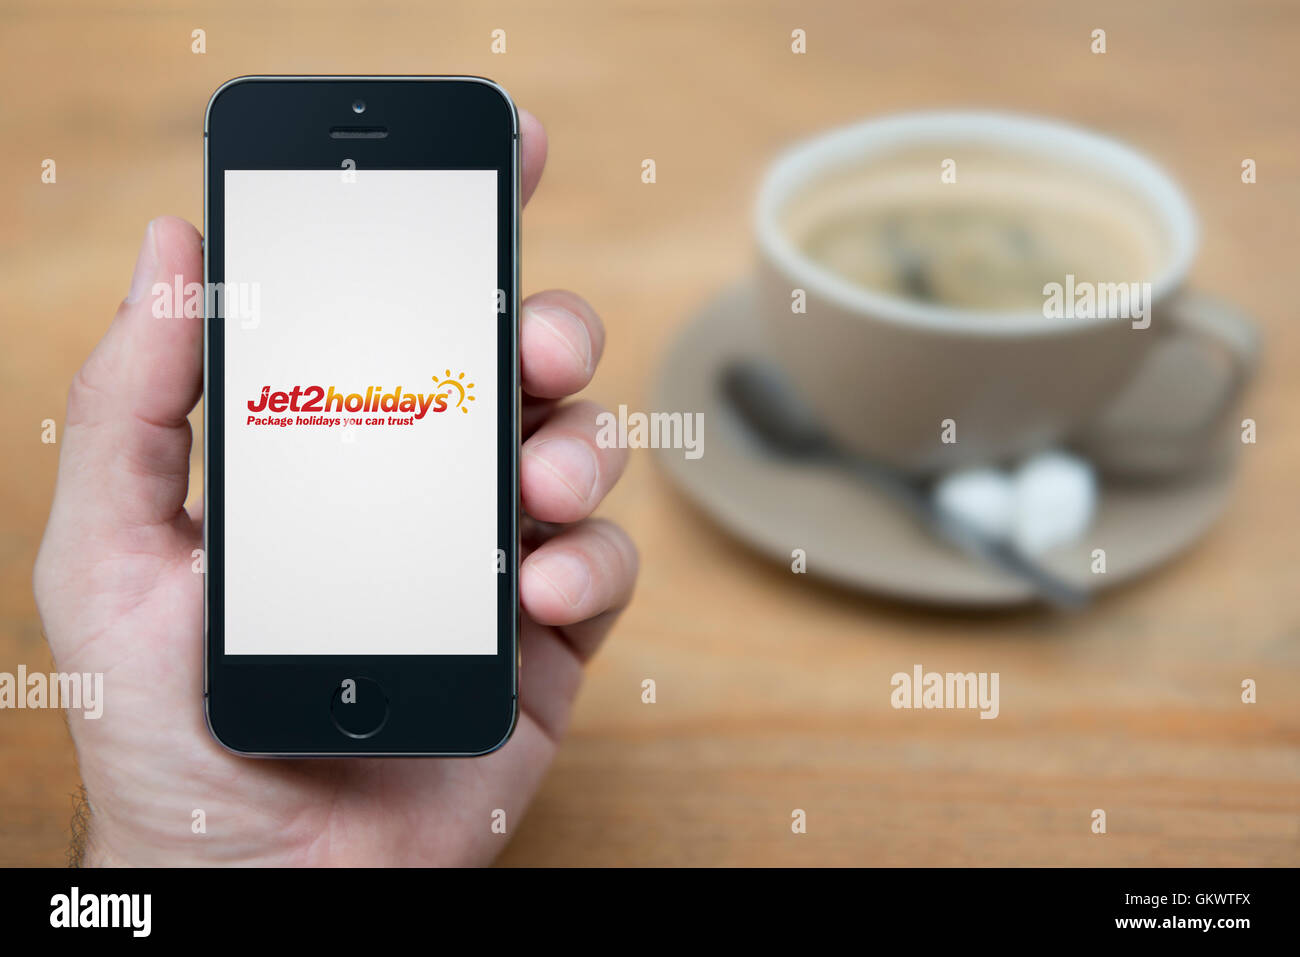 A man looks at his iPhone which displays the Jet2 Holidays logo, while sat with a cup of coffee (Editorial use only). Stock Photo